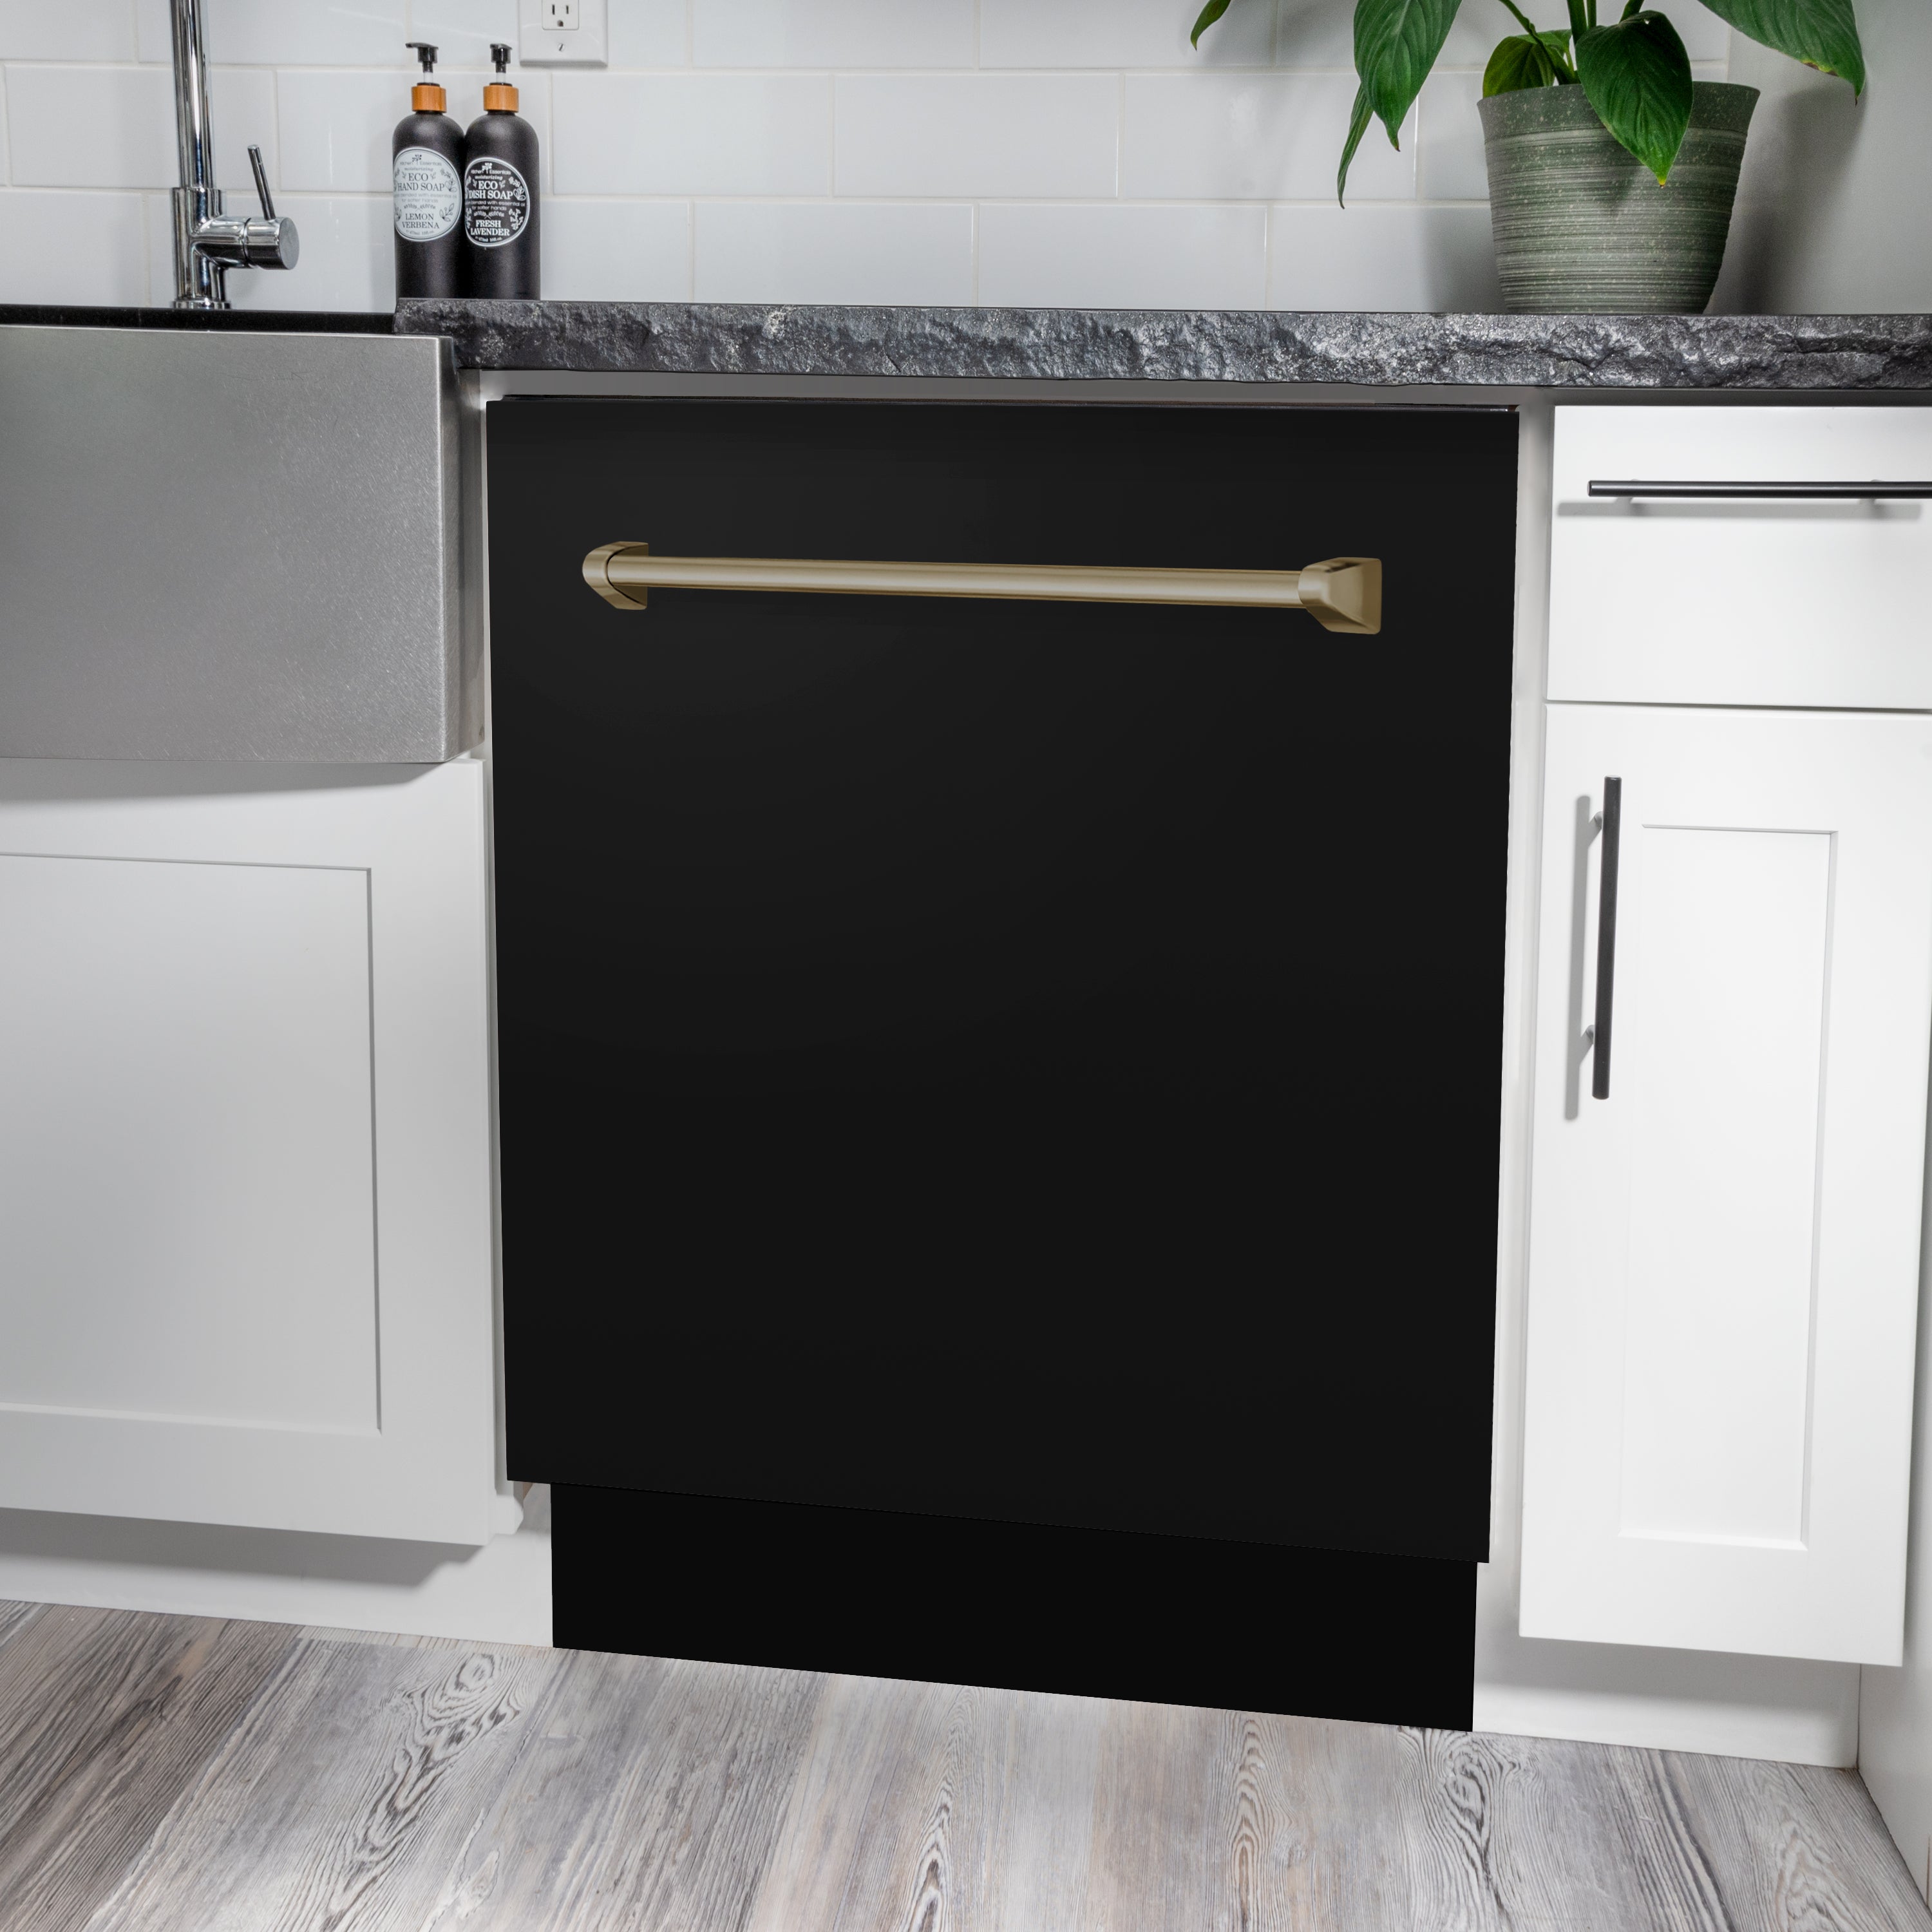 ZLINE 24" Dishwasher in Black Stainless Steel built-in to counter in modern farmhouse style kitchen.